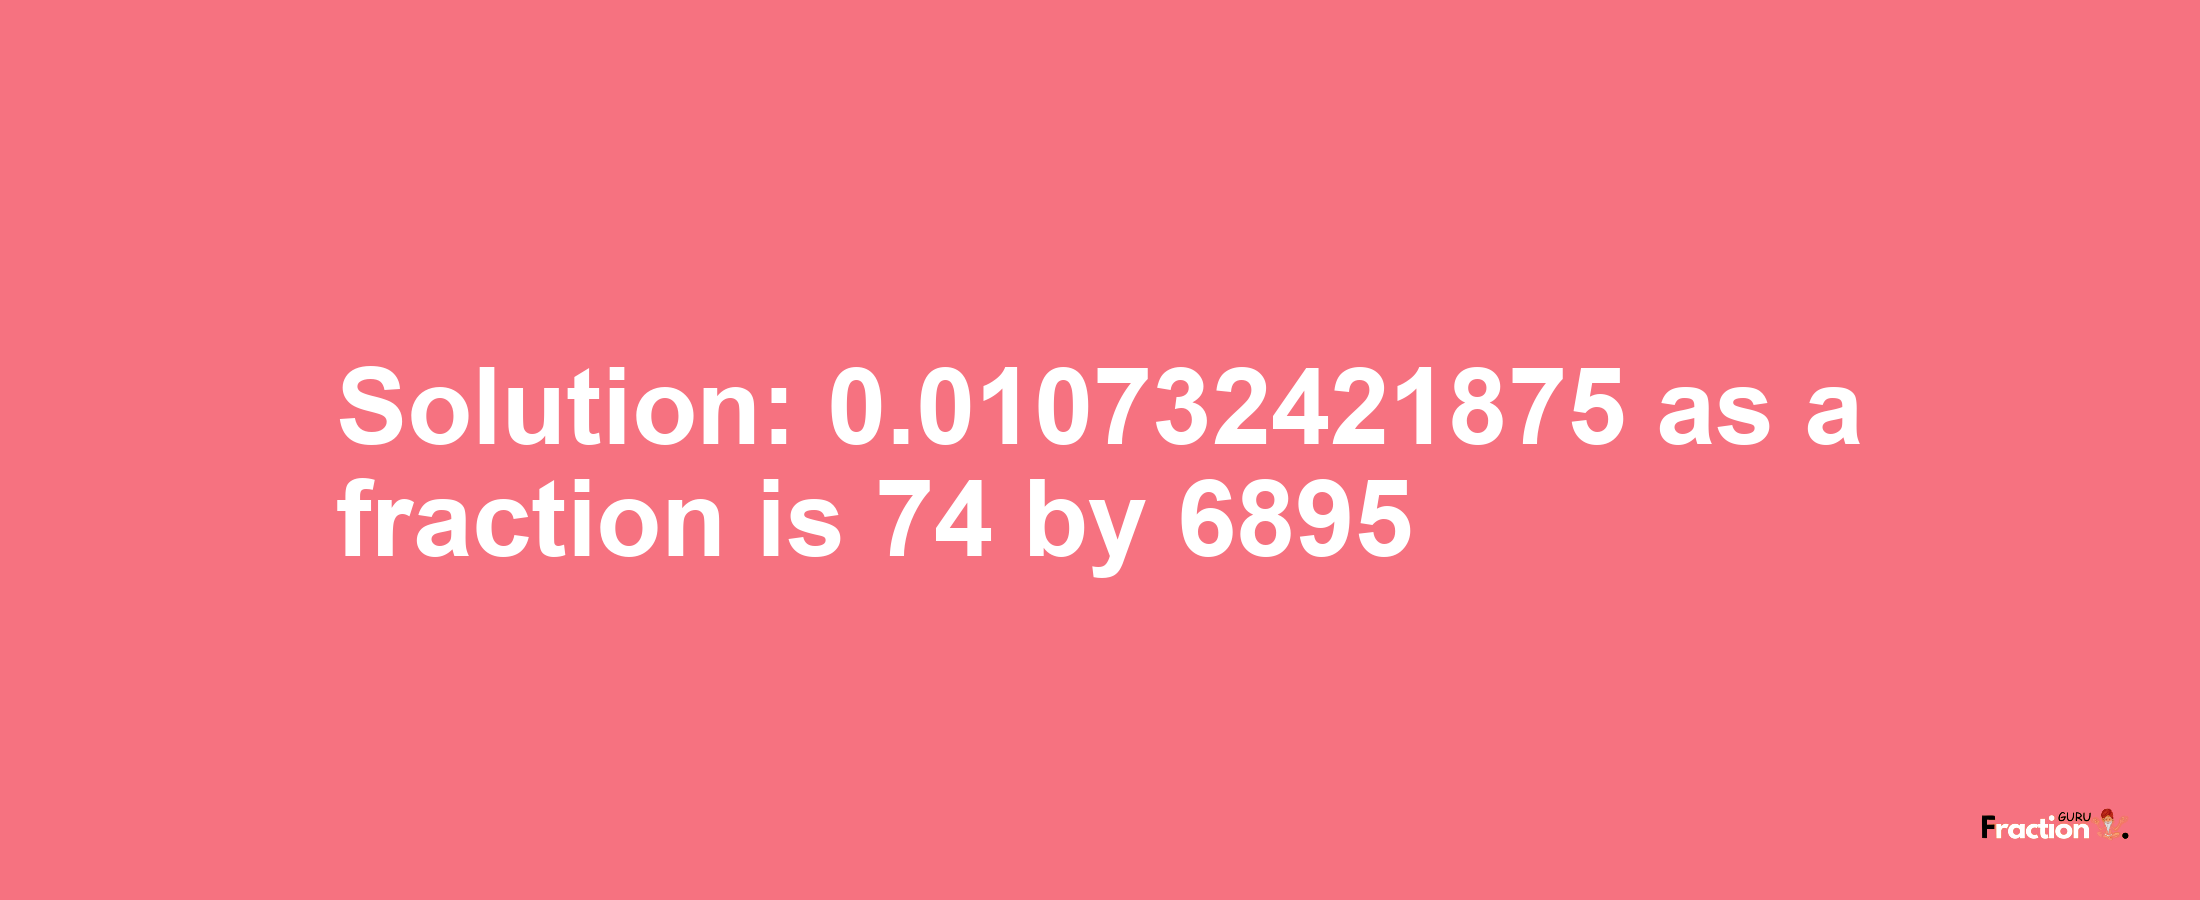 Solution:0.010732421875 as a fraction is 74/6895